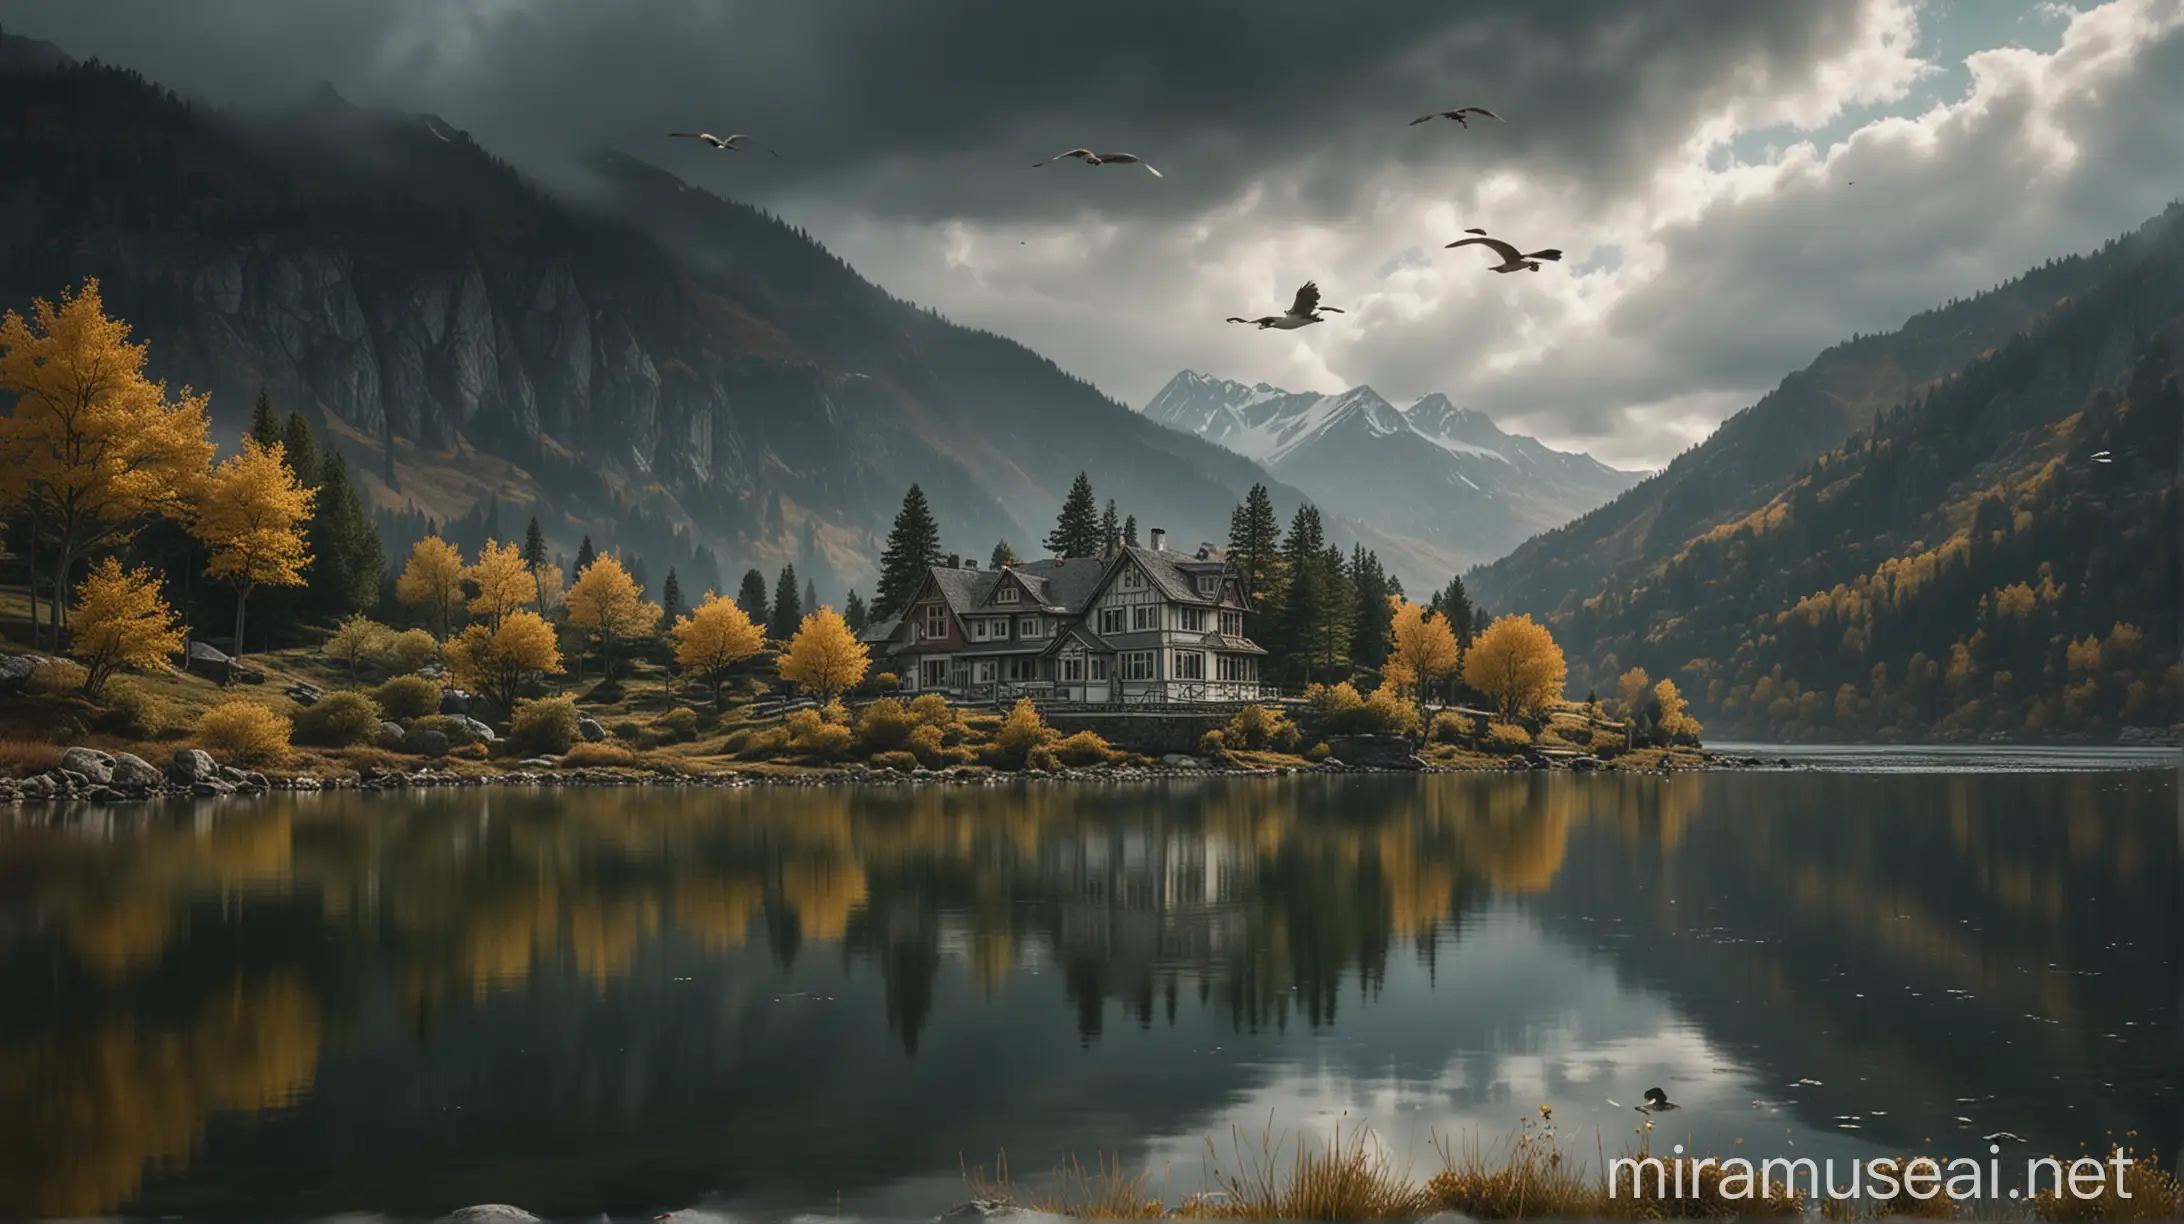 Tranquil Mountain Landscape with Reflective Waters and Quaint House